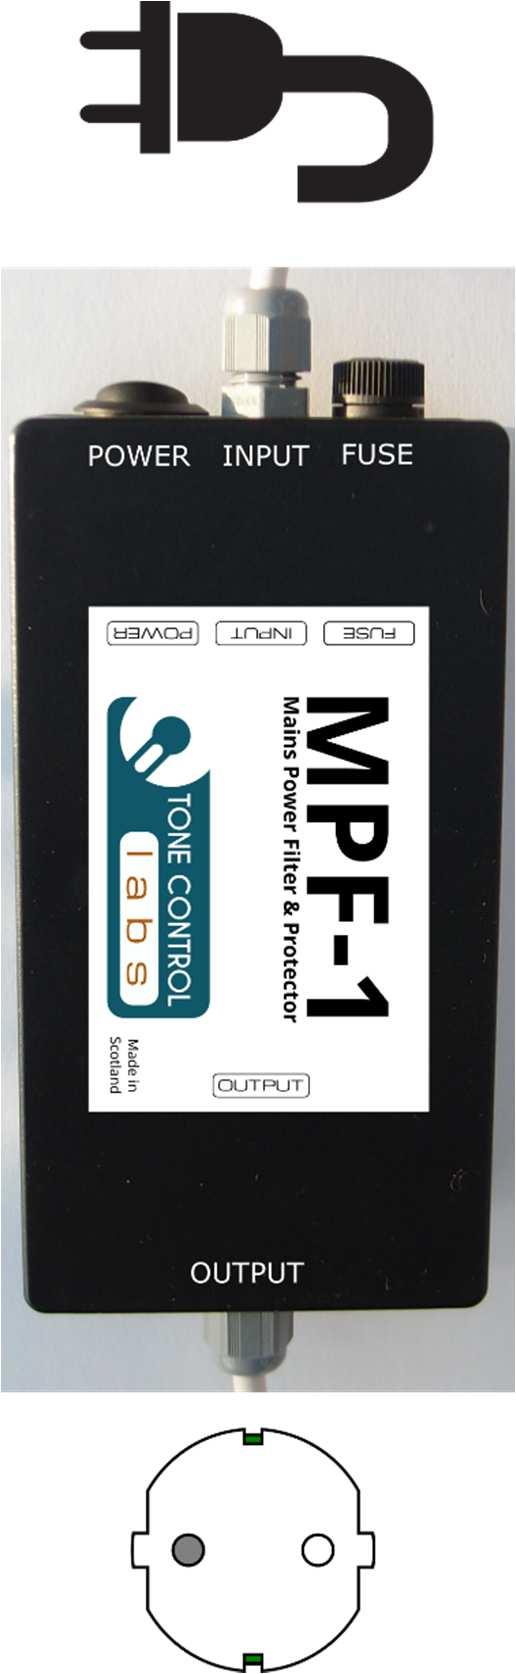 MPF-1 Interconnections / Specifications 5/7 Power Output: 1000W Output Current: 4A Input Connector: Output Connector: According to local standard According to local